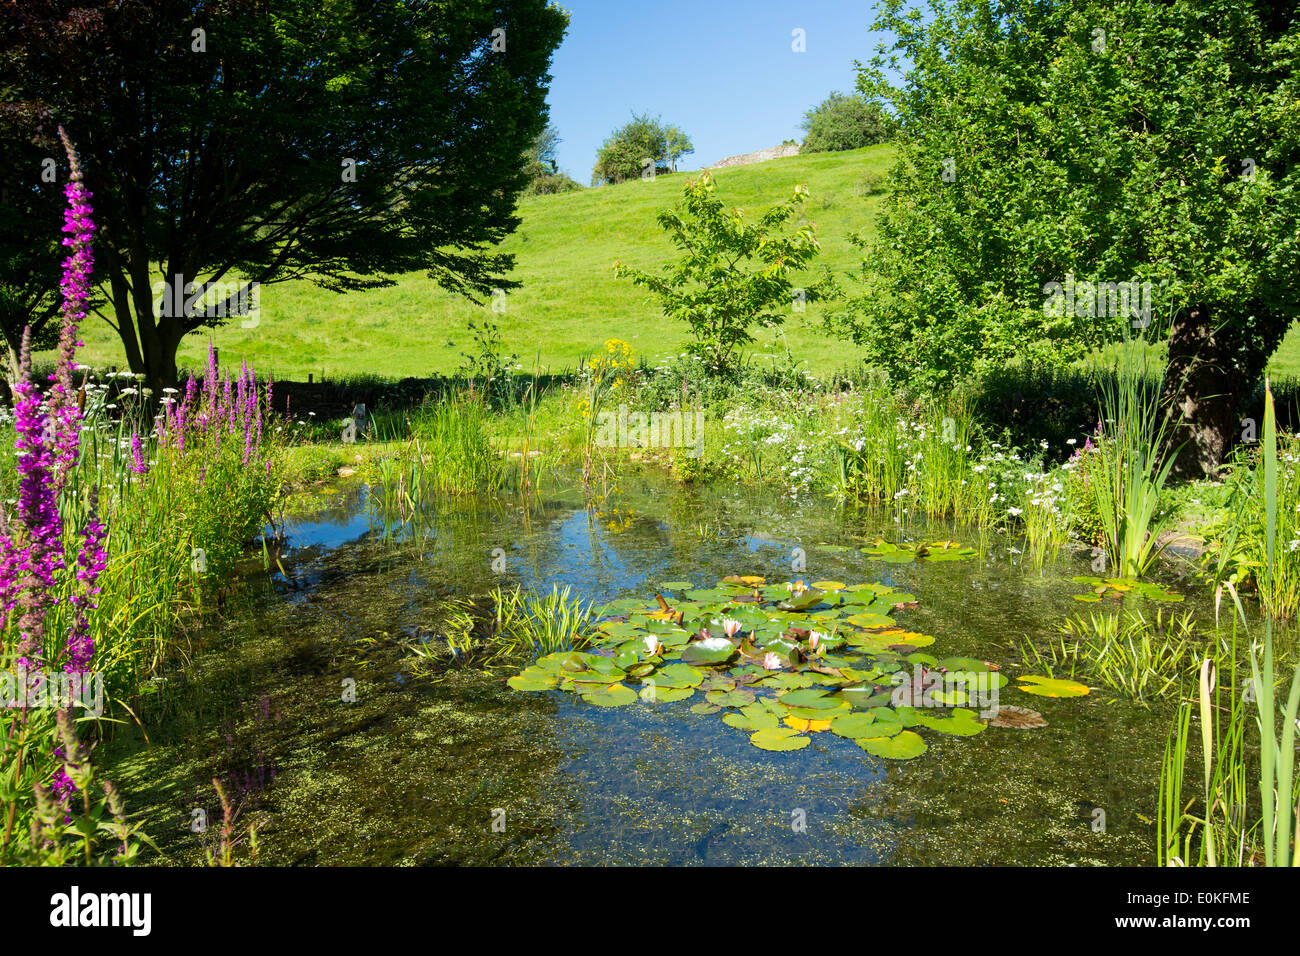 Wildlife pond, wildflowers, pond plants, apple tree and hornbeam tree in a country garden in The Cotswolds, Oxfordshire, UK Stock Photo